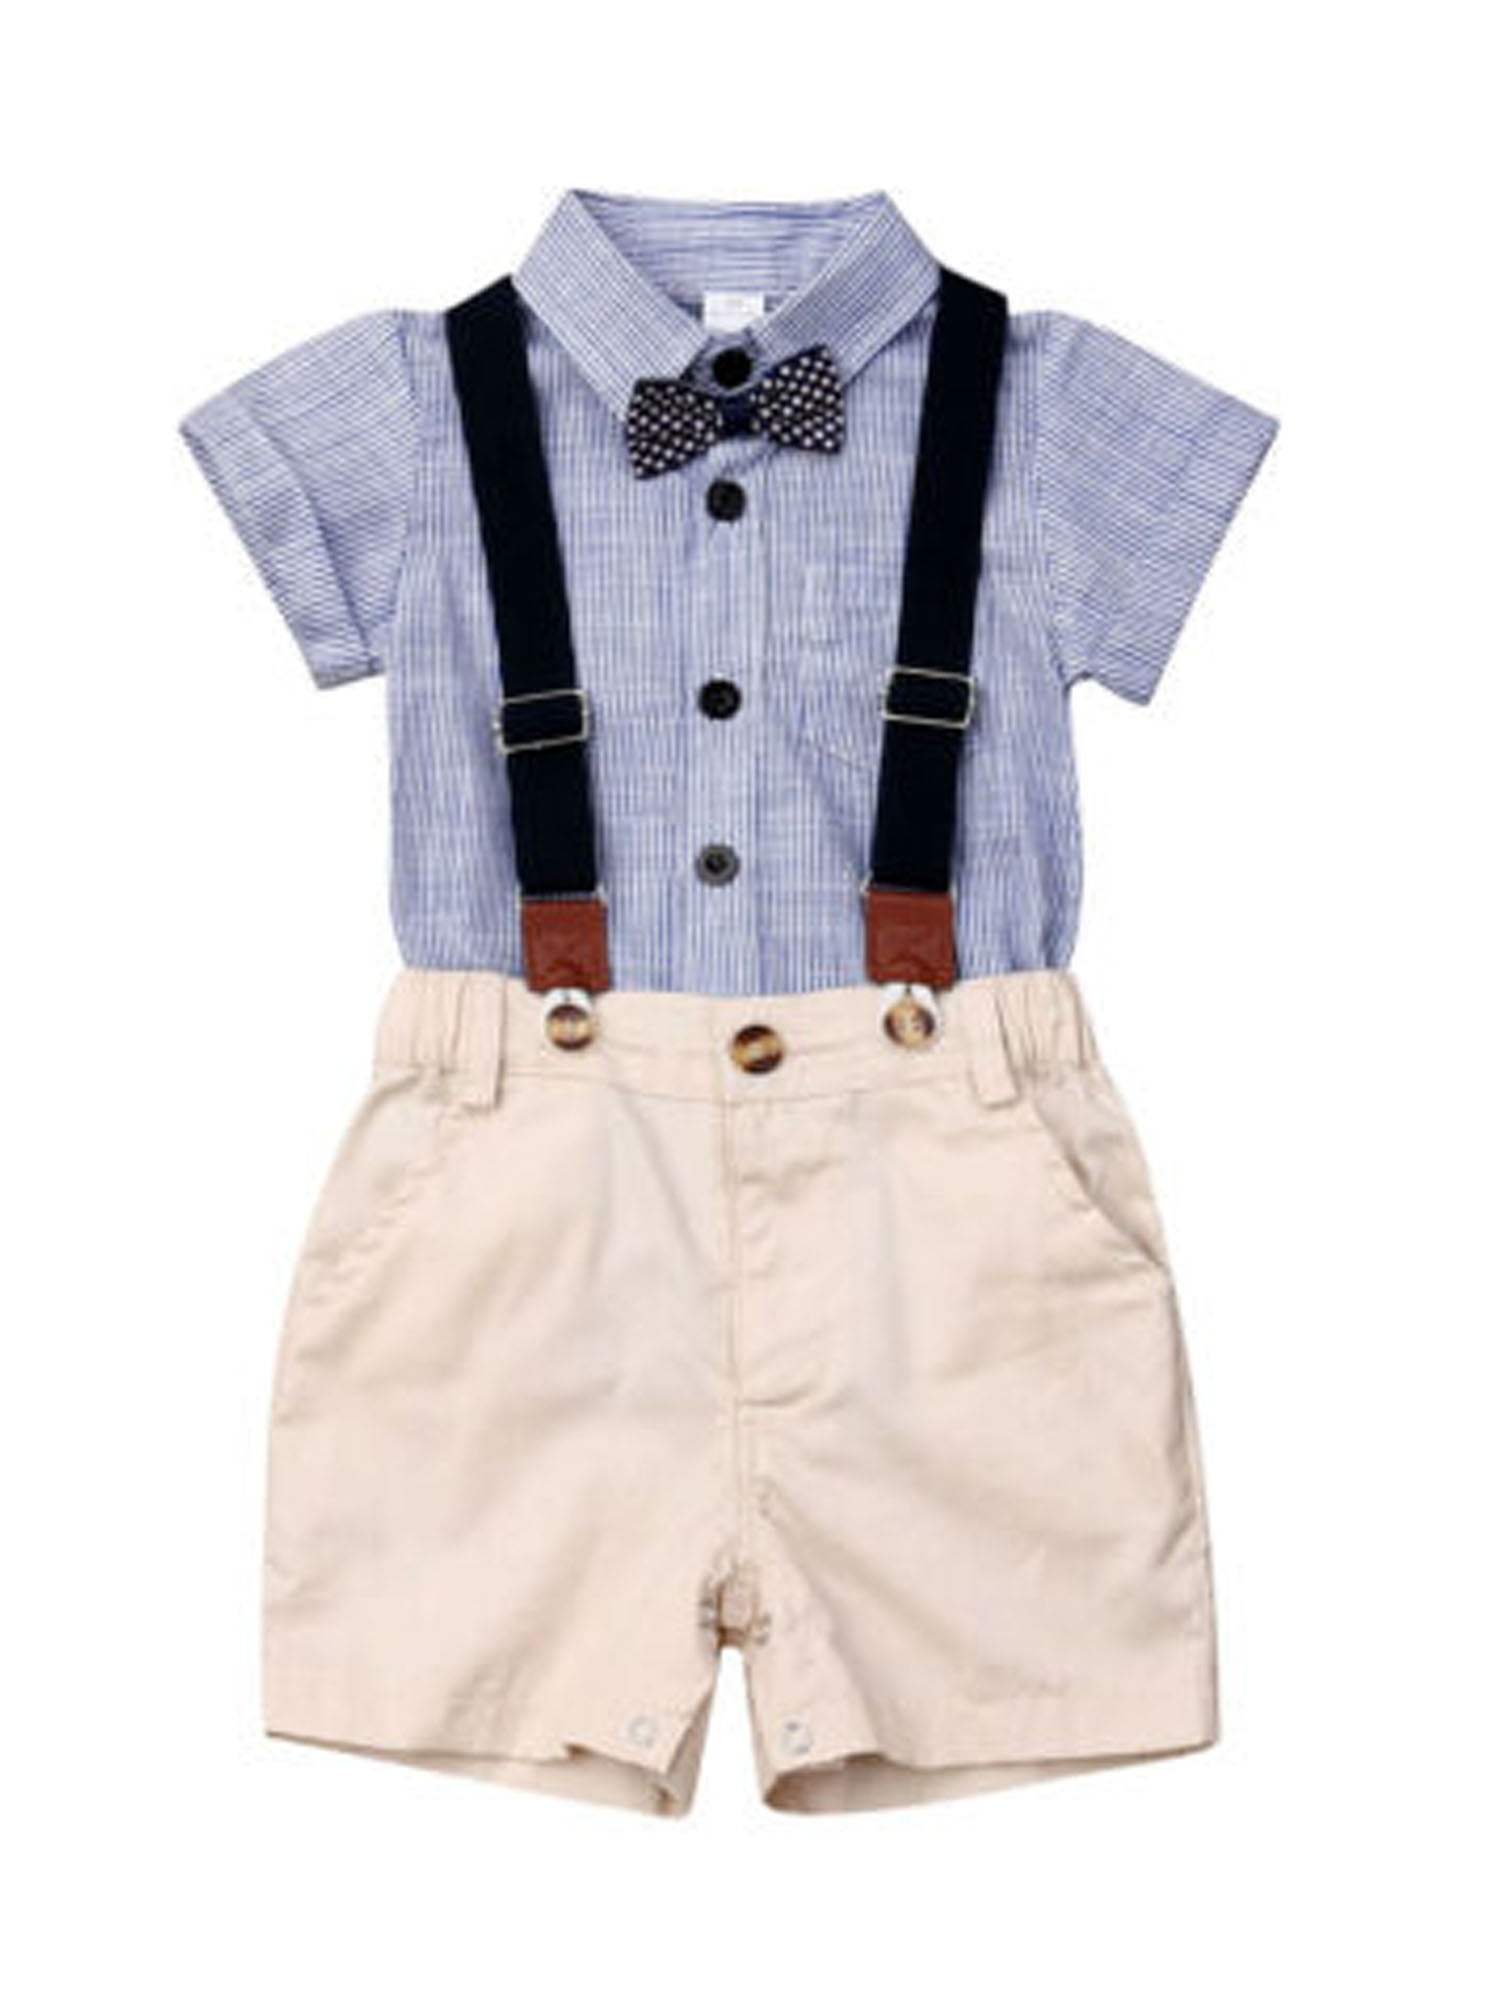 Baby Boys Gentleman Outfits Suits Infant Short Sleeve Shirt+Bib Pants+Bow Tie Overalls Clothes Set 